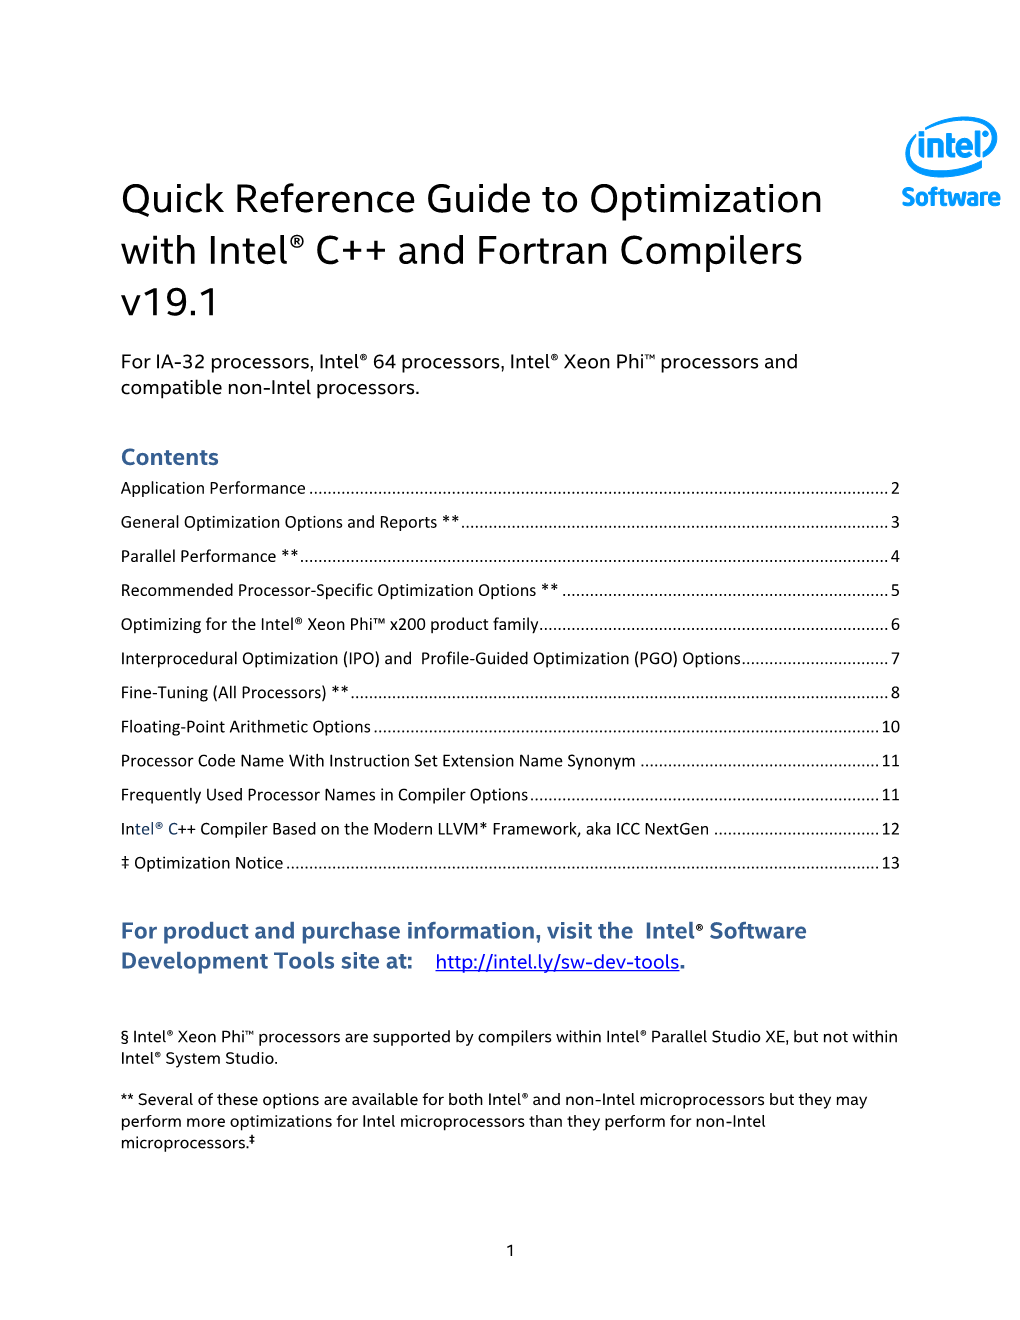 Quick-Reference Guide to Optimization with Intel® Compilers